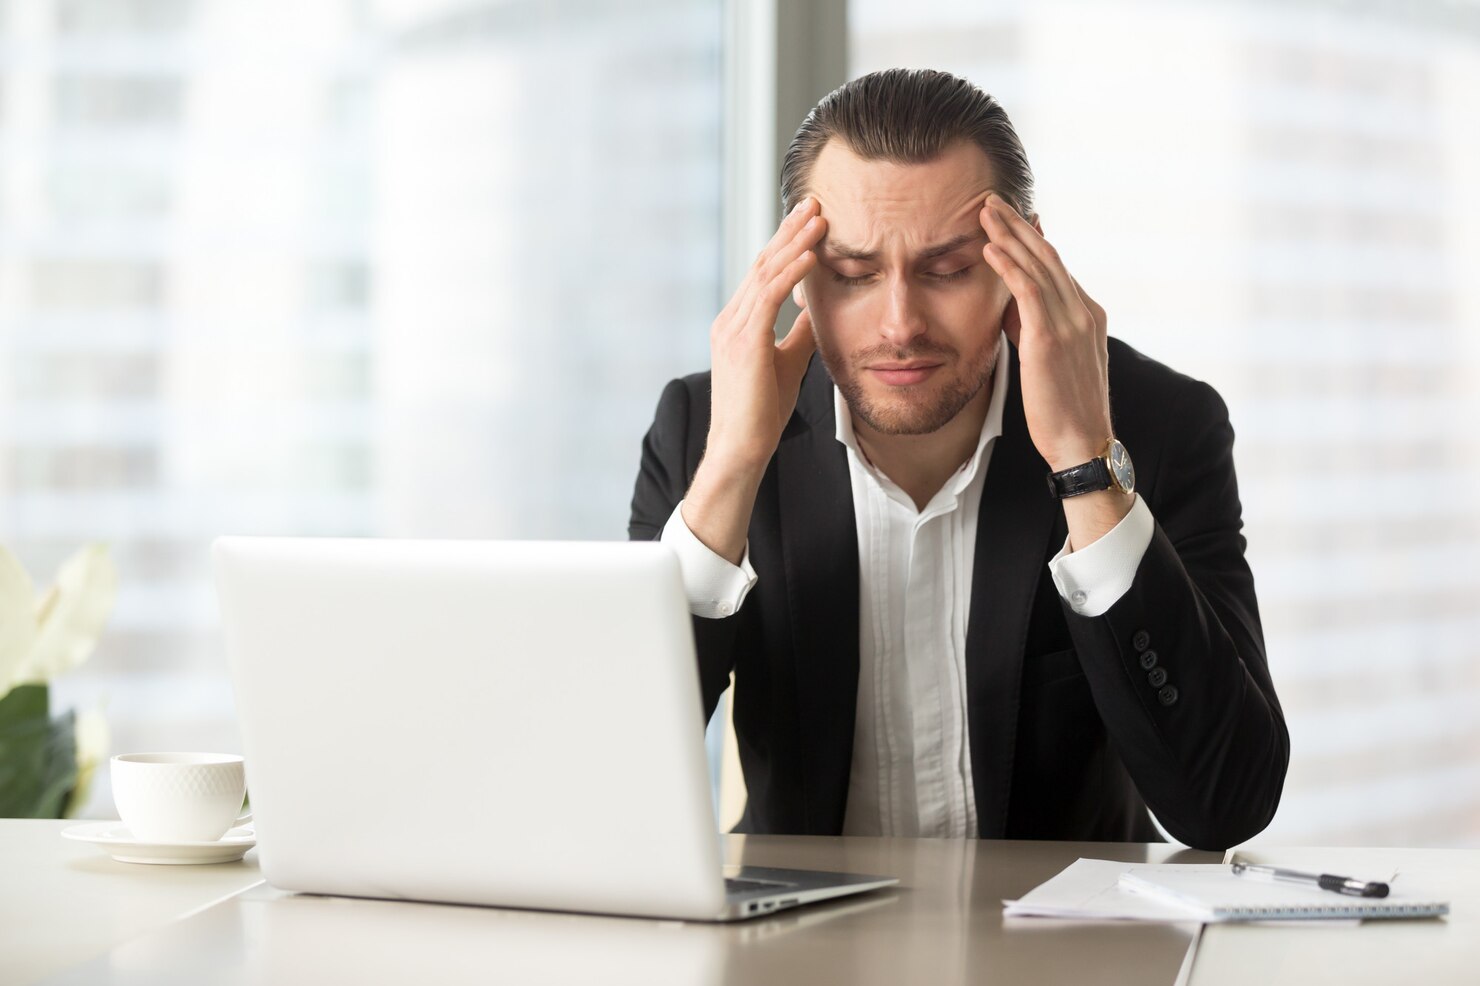 Remote Workers Report Negative Mental Health Impacts